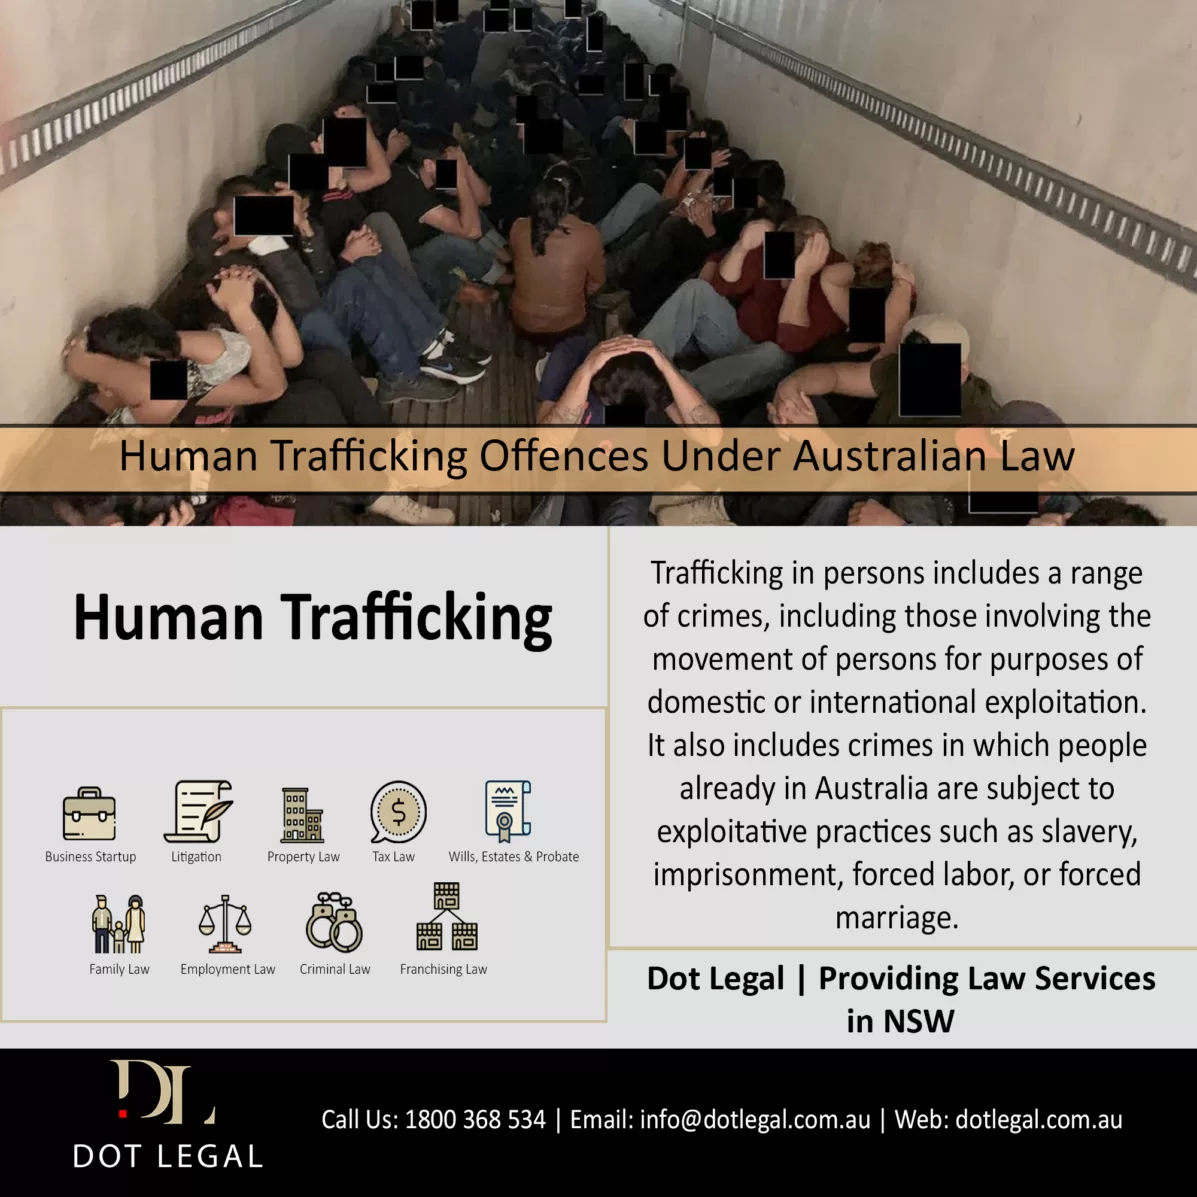 Human Trafficking Offences Under Australian Law